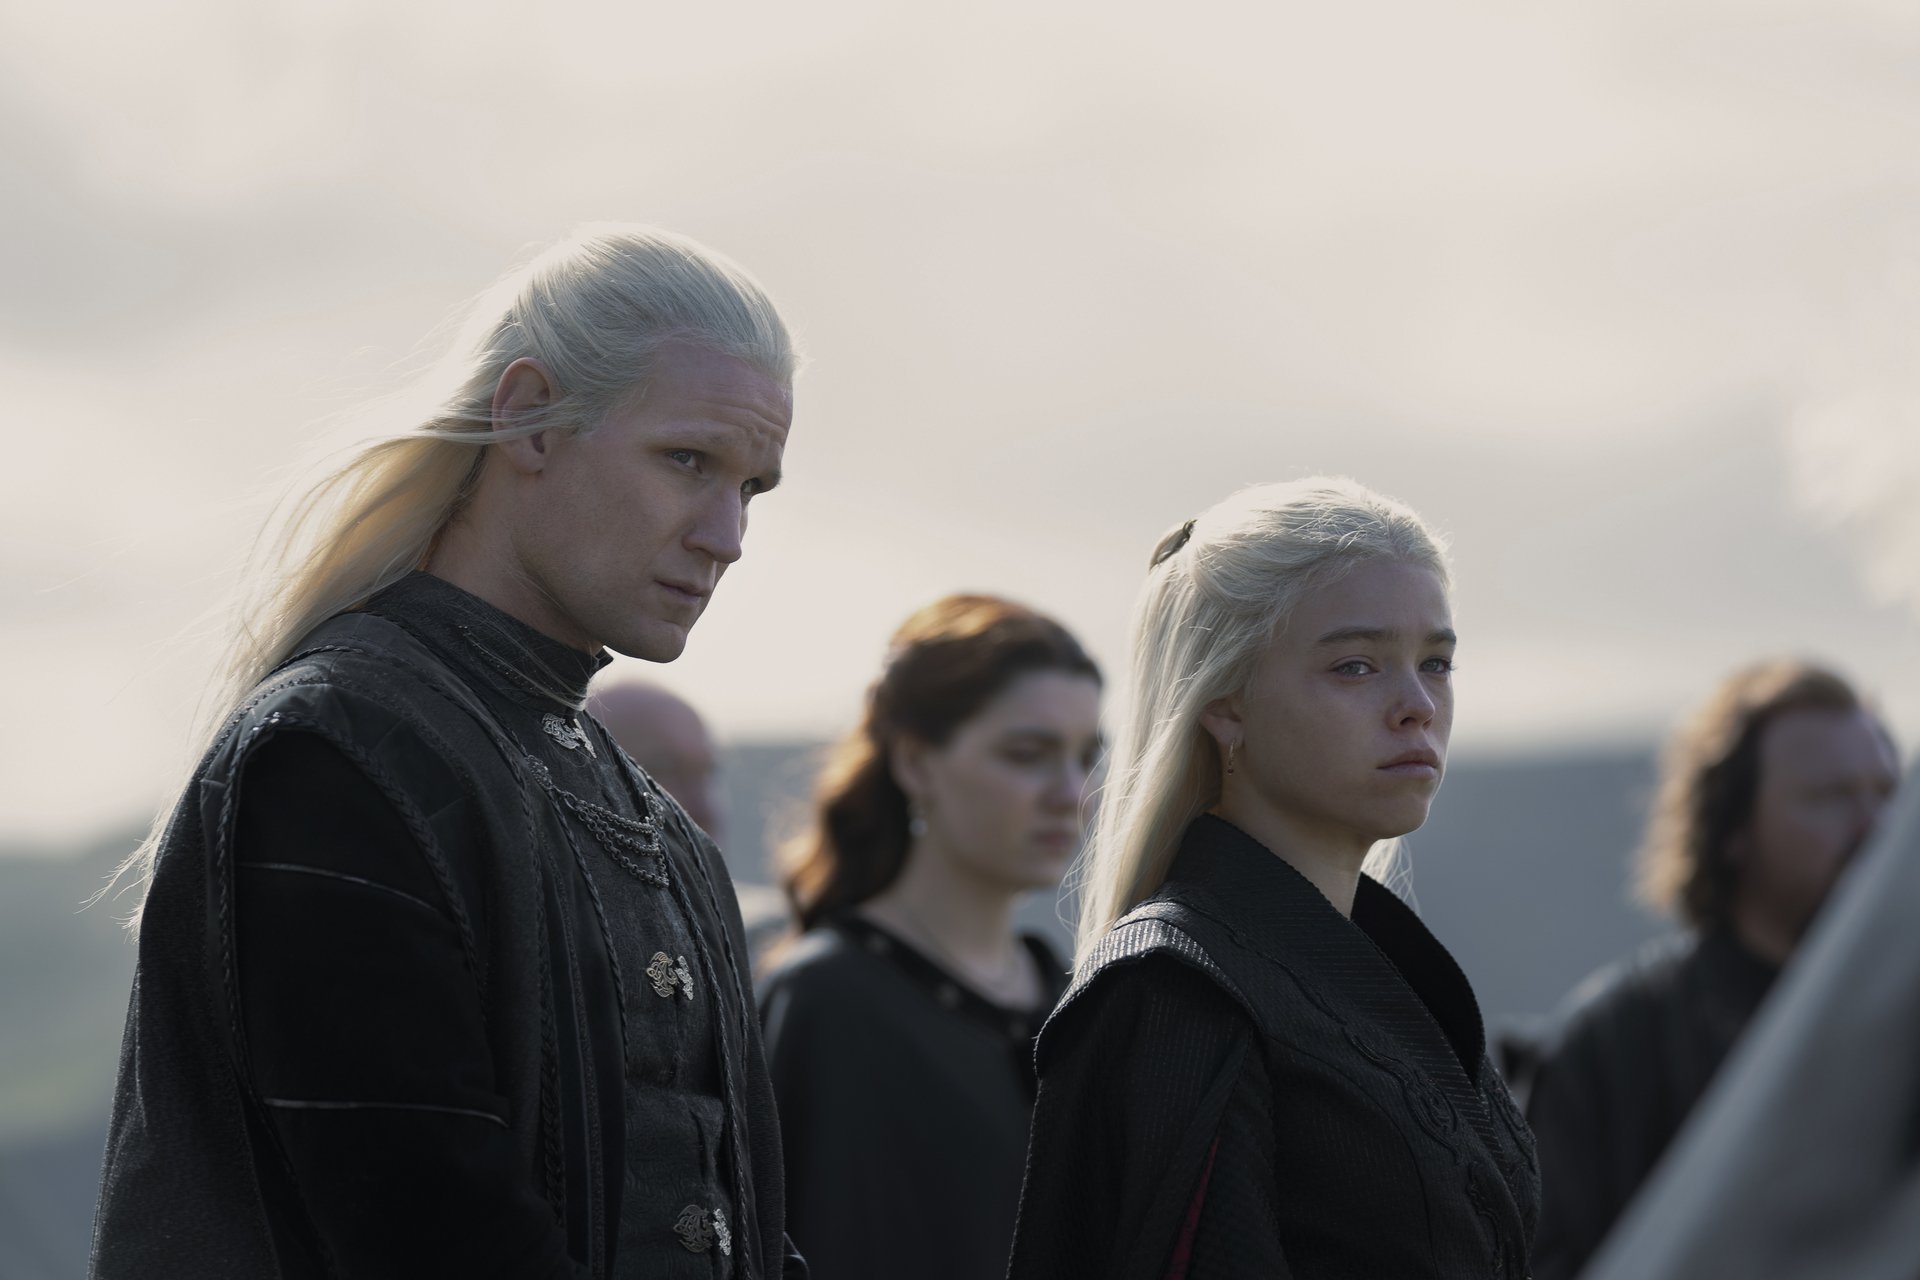 Matt Smith and Milly Alcock as Rhaenyra and Daemon Targaryen in 'House of the Dragon,' which is based on events outlined in George R.R. Martin's book, 'Fire & Blood.' They're both staring toward the camera, and Rhaenyra looks unhappy.